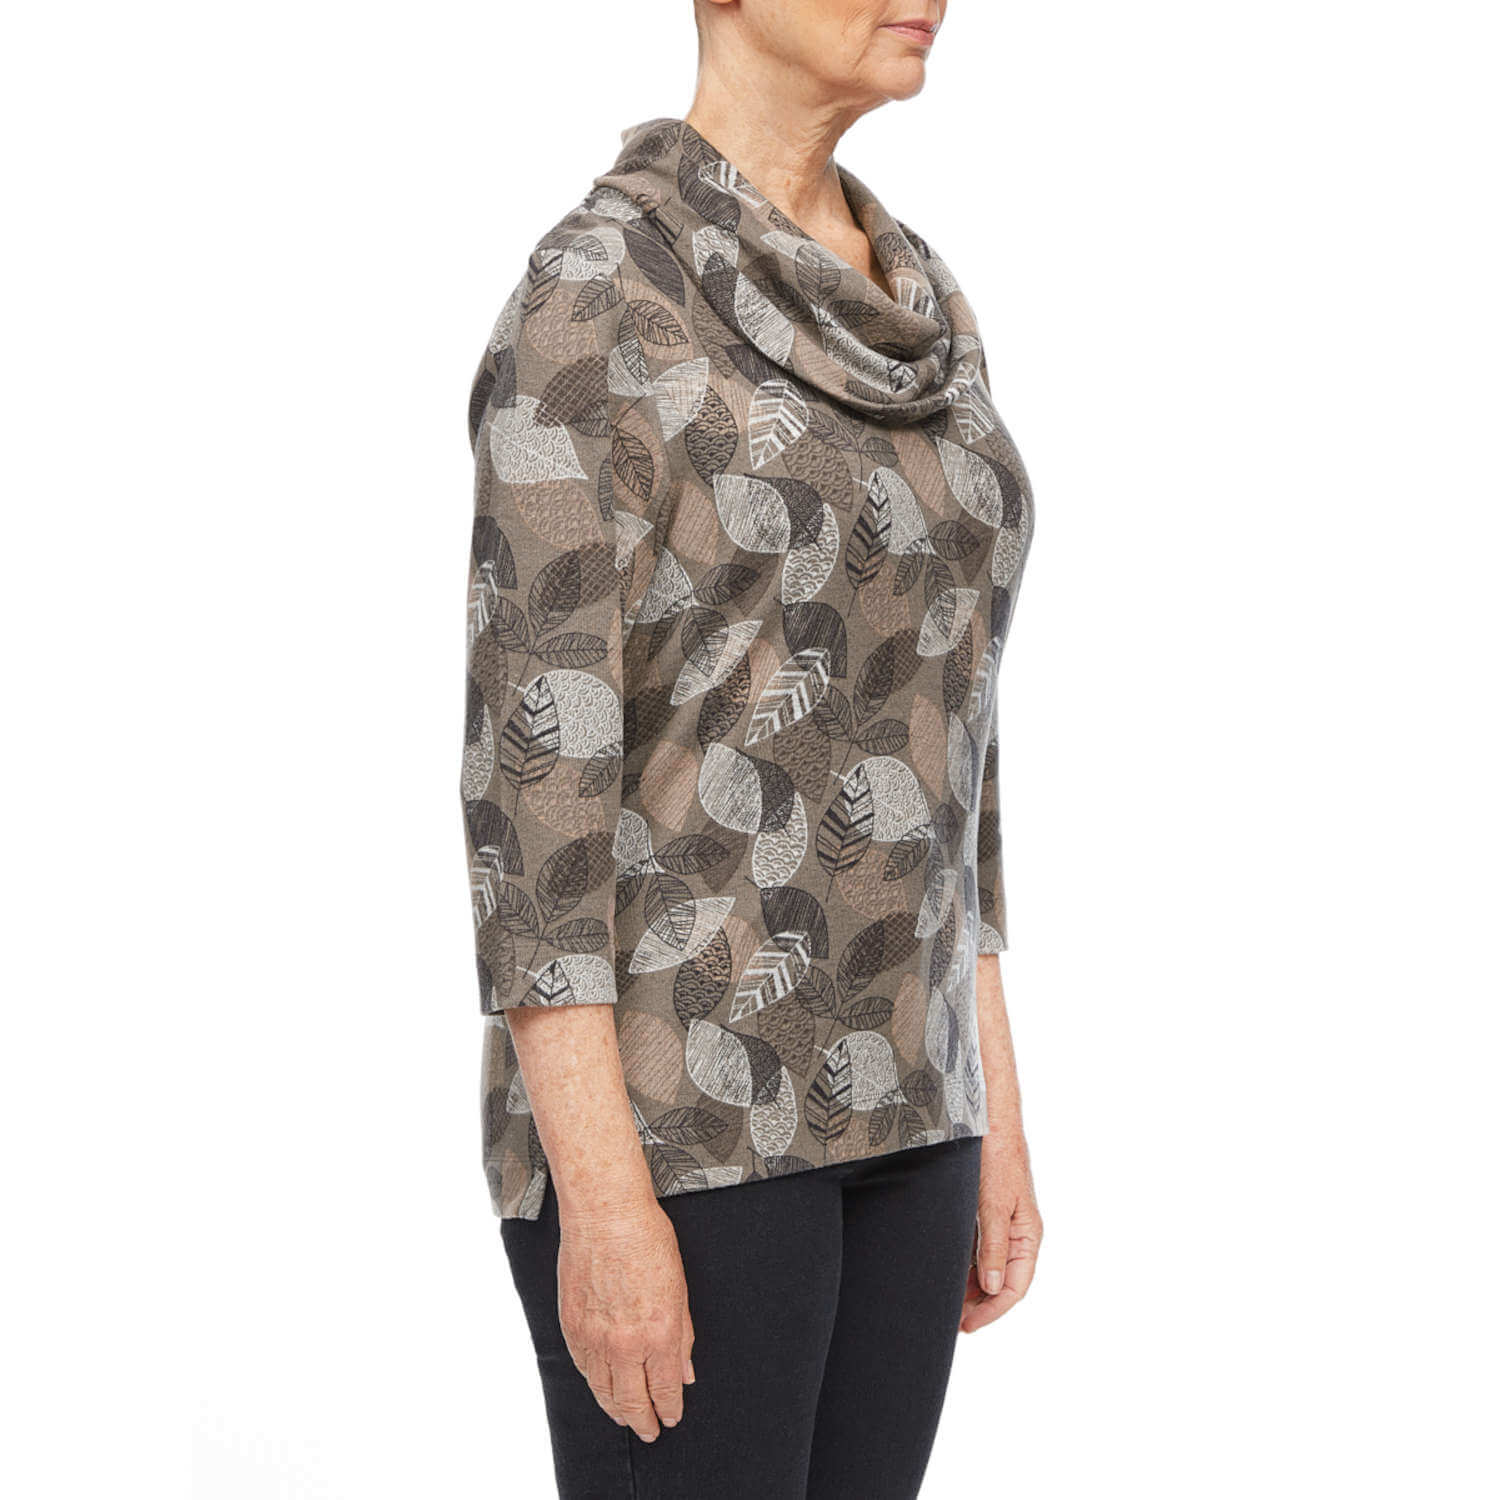 Tigiwear Leaf Print Cowl Neck Top- Taupe 2 Shaws Department Stores